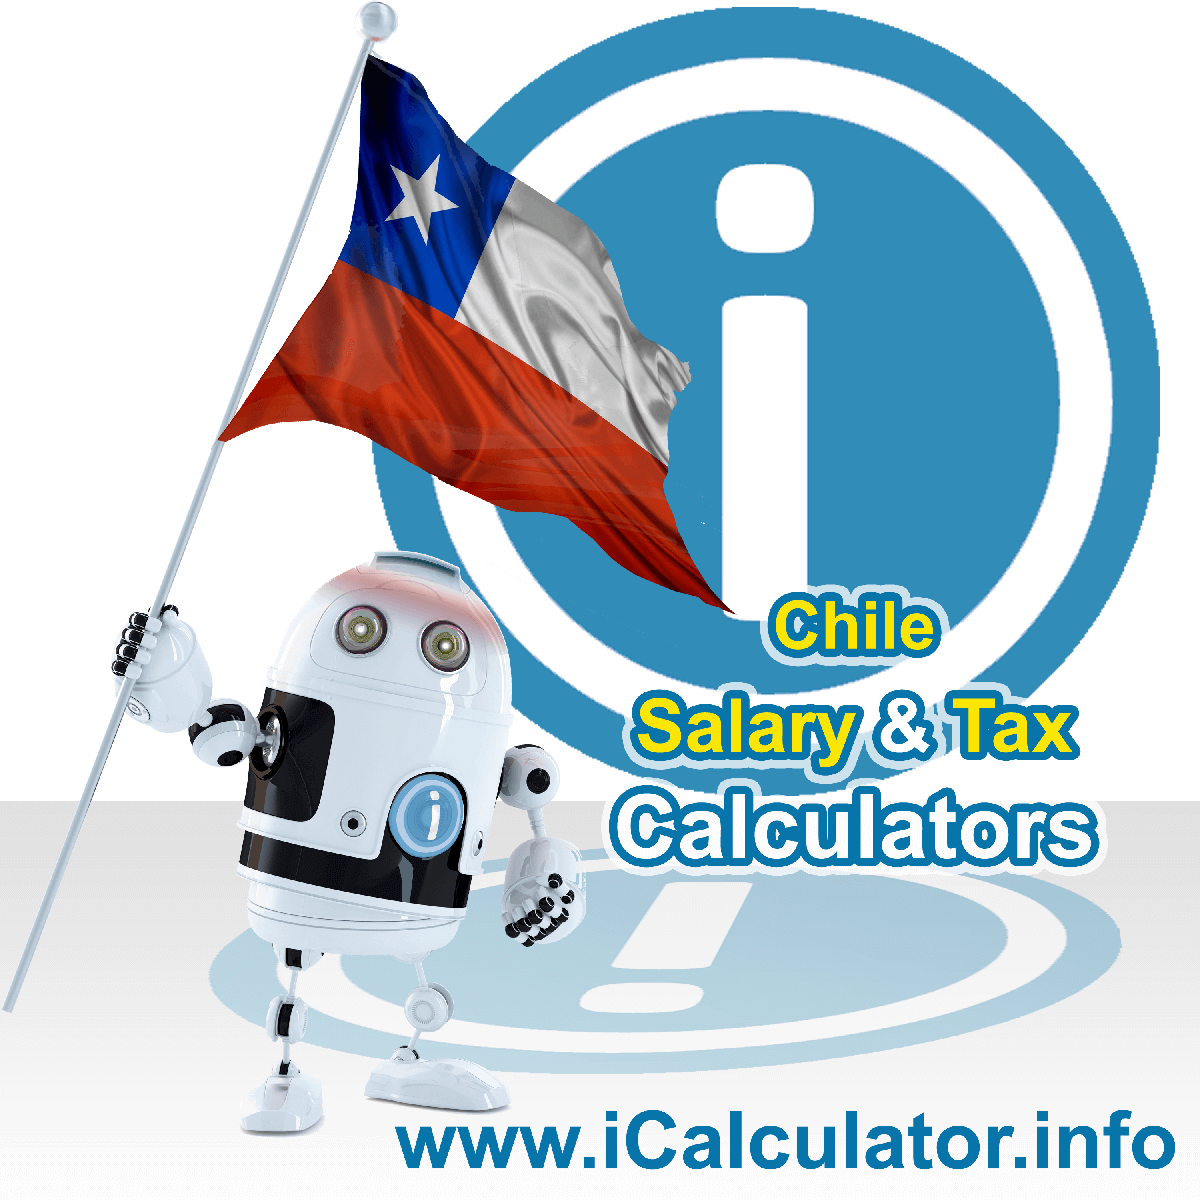 Chile Wage Calculator. This image shows the Chile flag and information relating to the tax formula for the Chile Tax Calculator